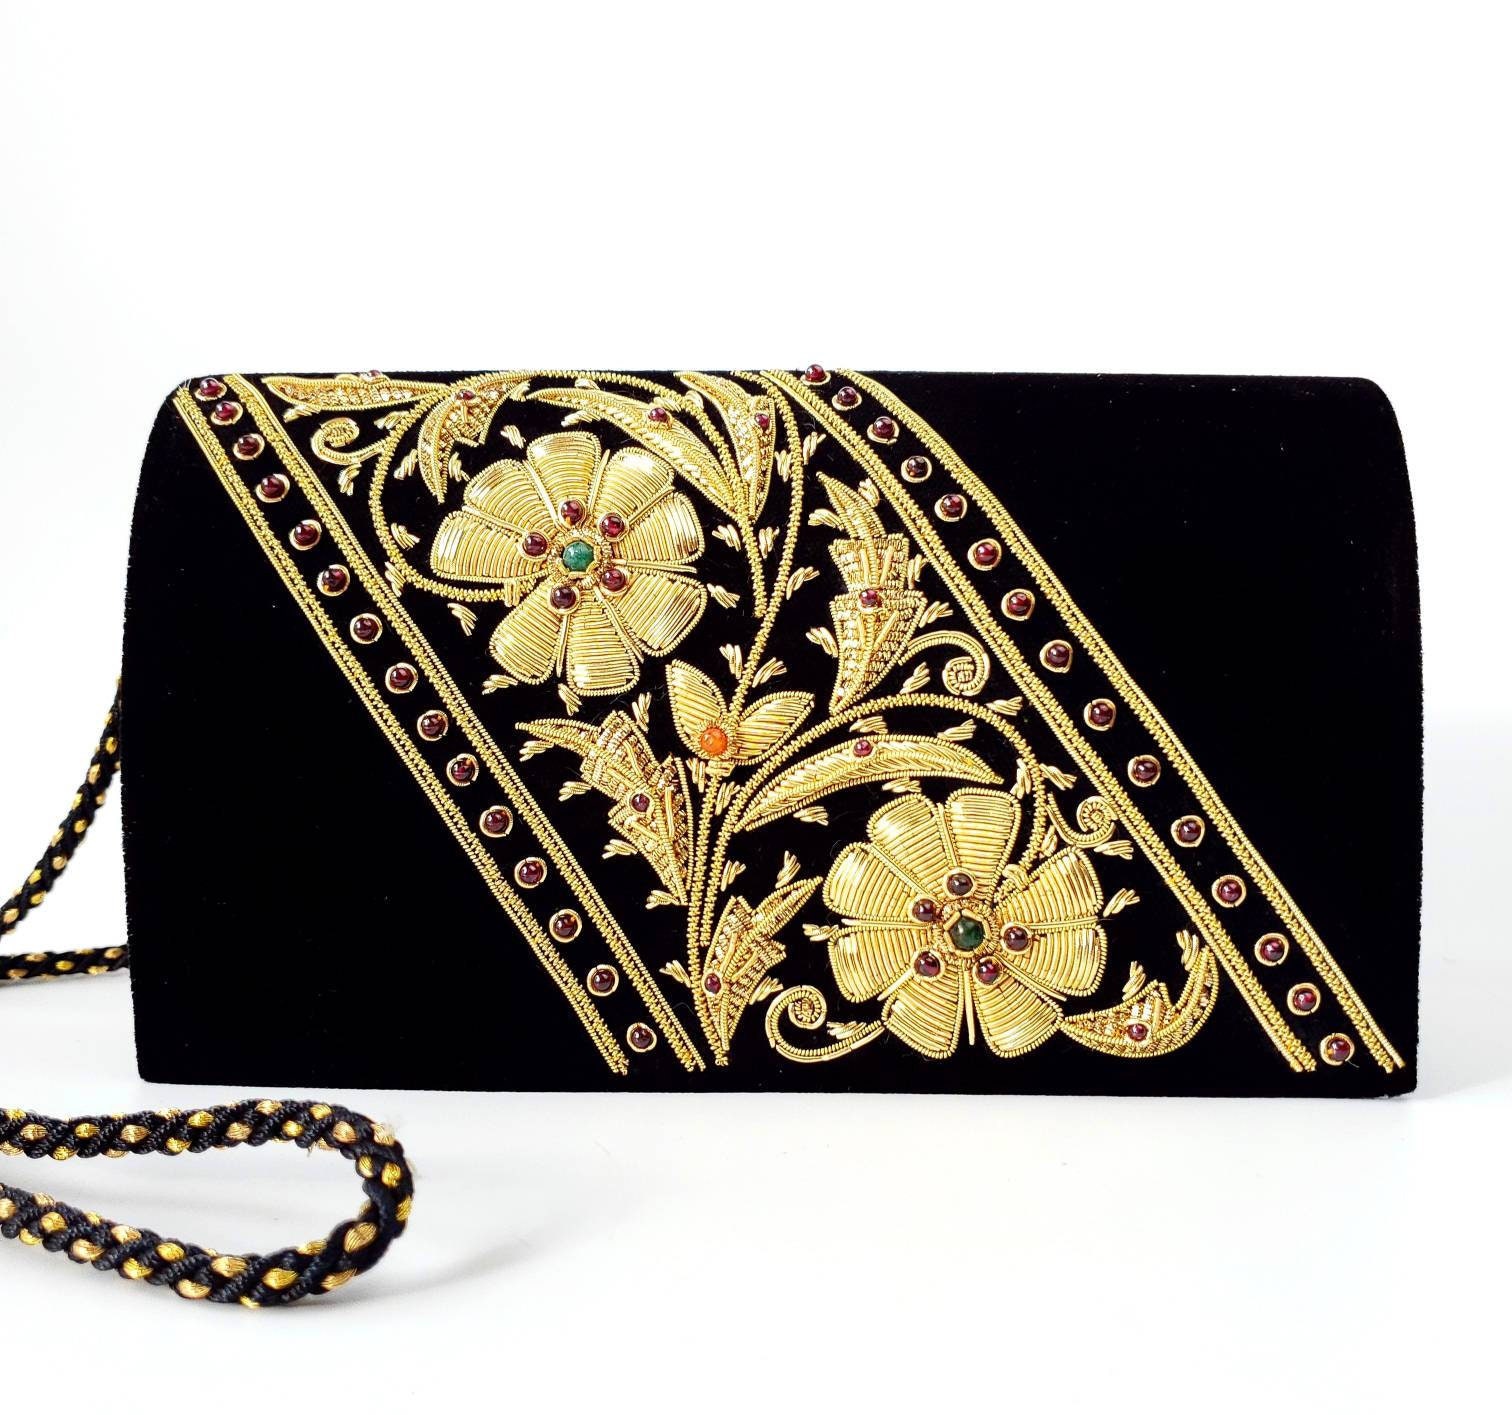 Luxury black velvet evening bag embroidered with gold flowers